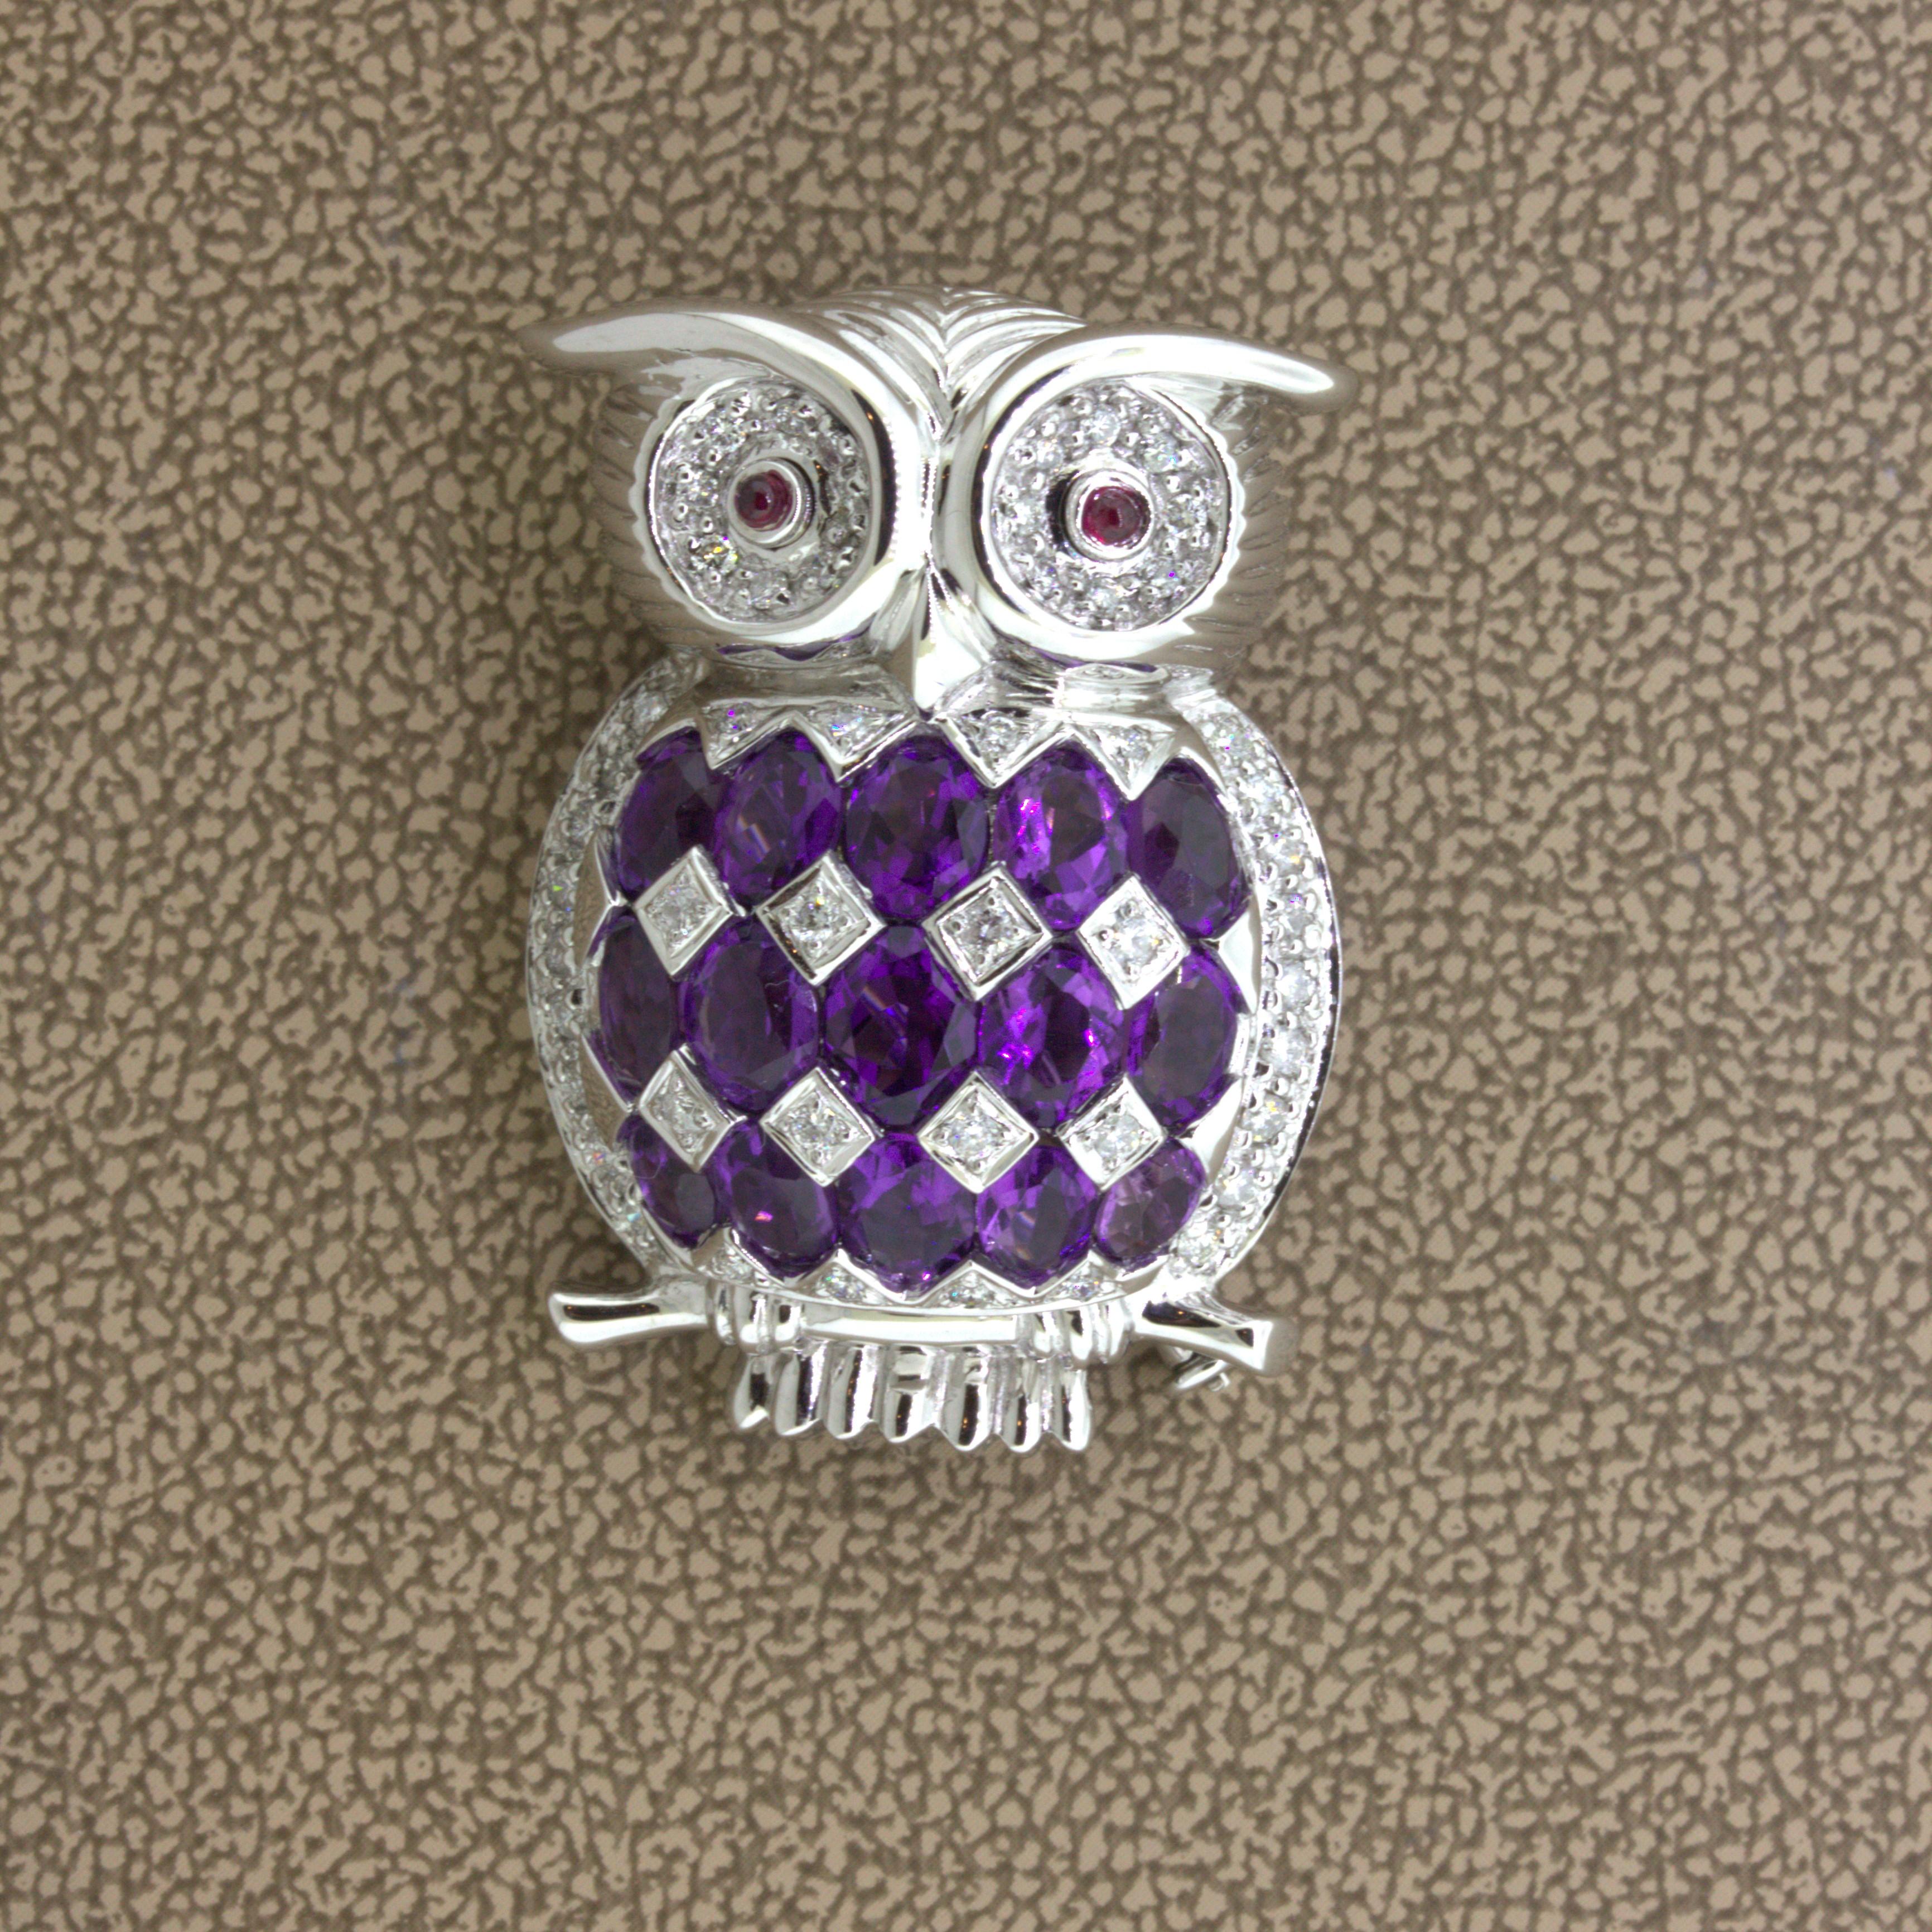 A fun and stylish owl that can be worn as a brooch or pendant! It features 15 oval-shaped amethyst, weighing approximately 4 carats total, which has rich royal-purple color. Adding to that, are 0.52 carats of round brilliant-cut diamonds set around